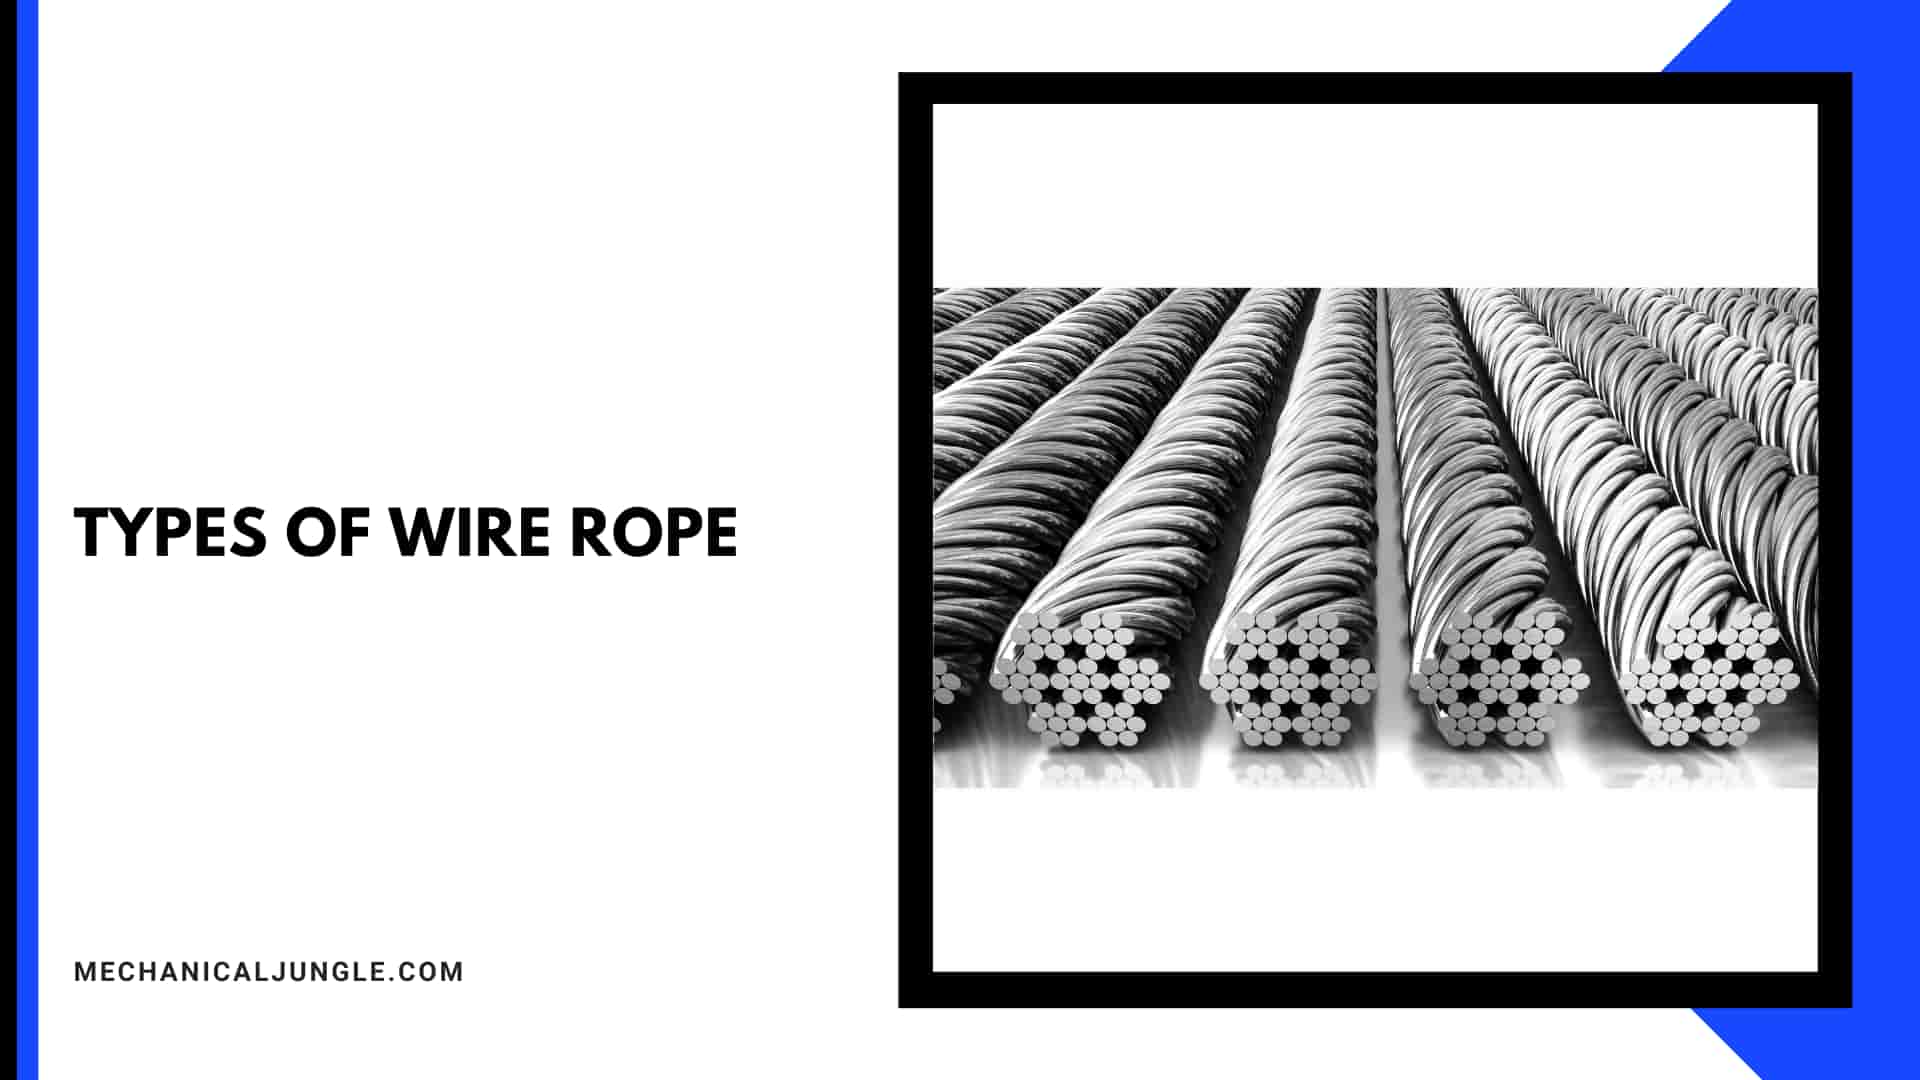 Types of Wire Rope